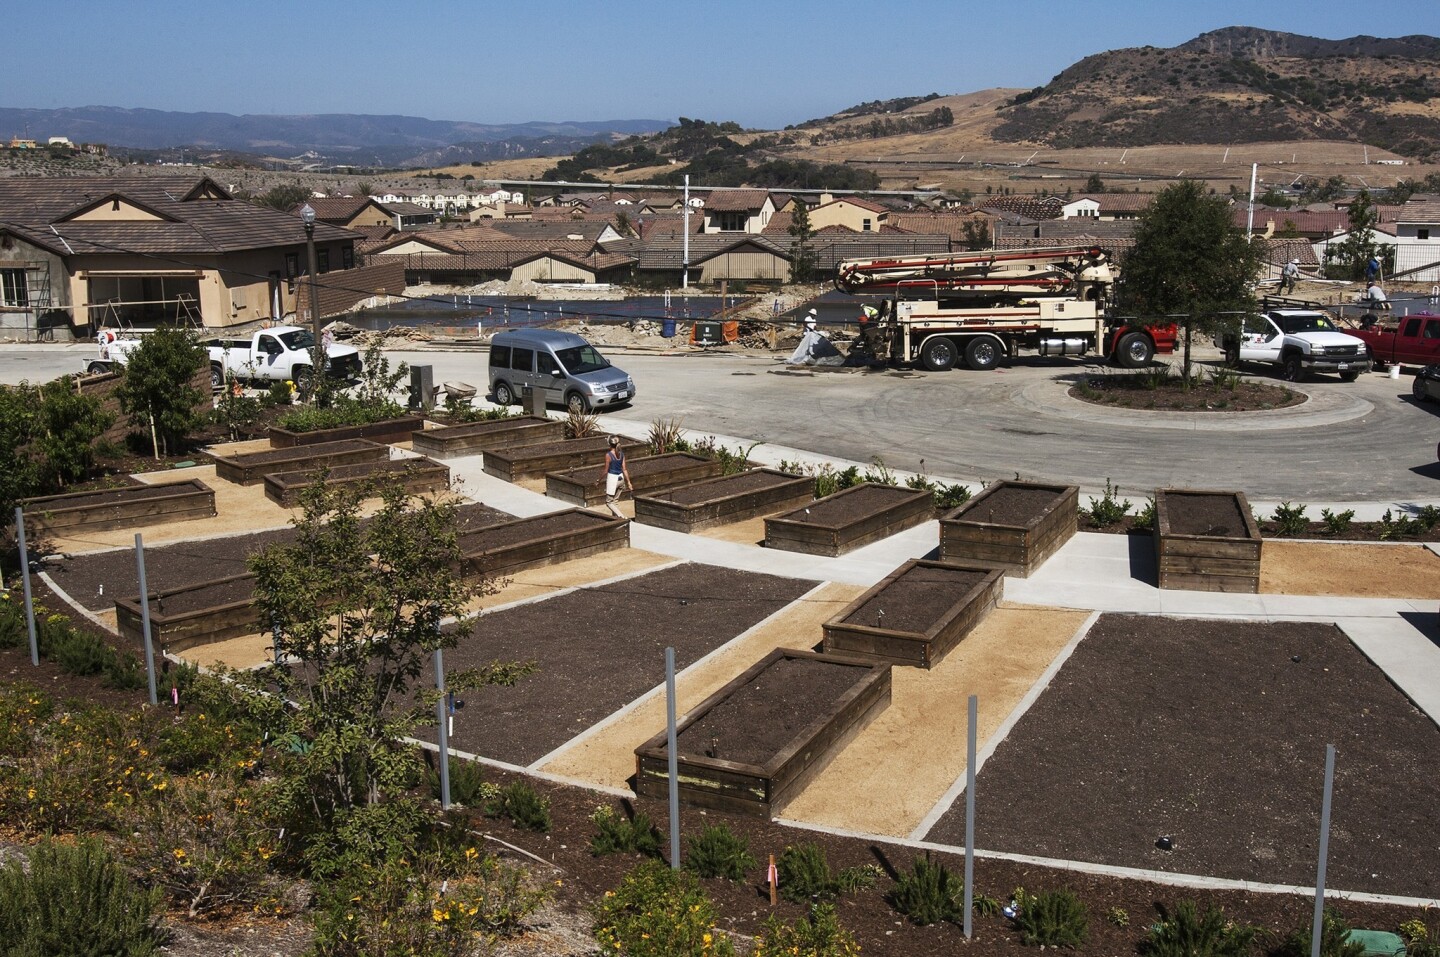 Residents may participate in shared gardens at Rancho Mission Viejo, a new "agrihood" development in south Orange County.